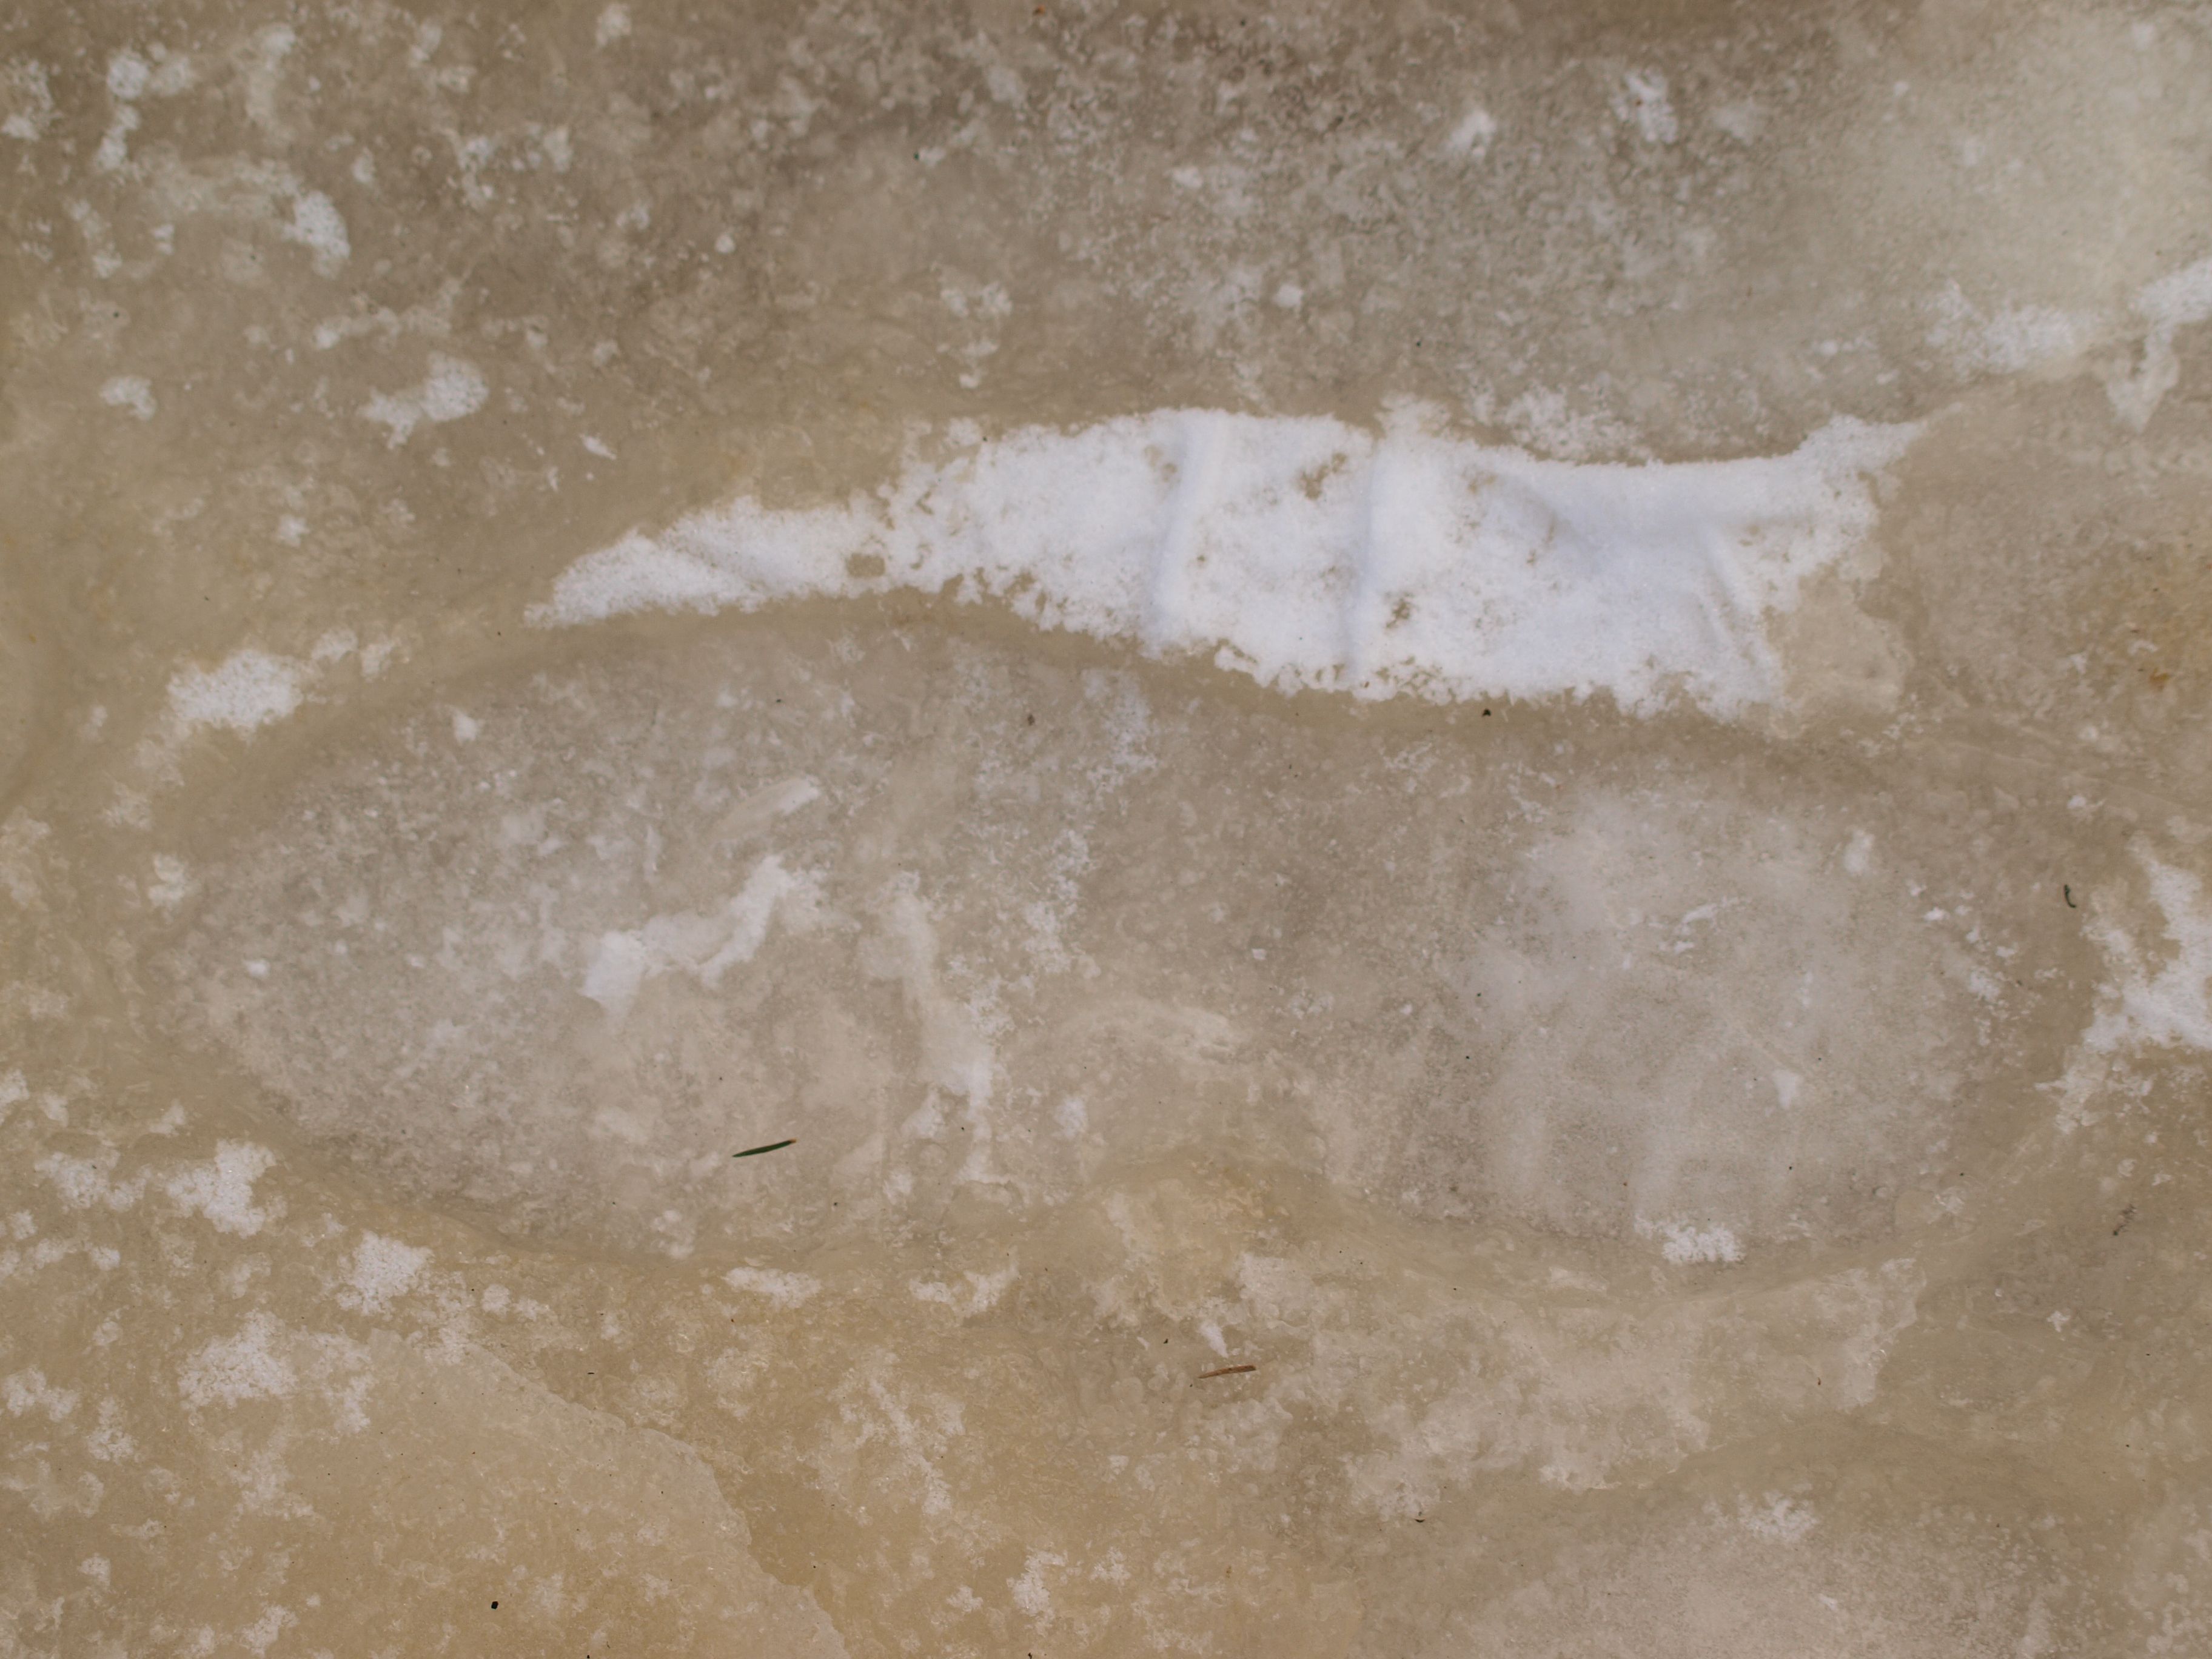 Footstep in Ice Texture, Cold, Footstep, Freeze, Ice, HQ Photo